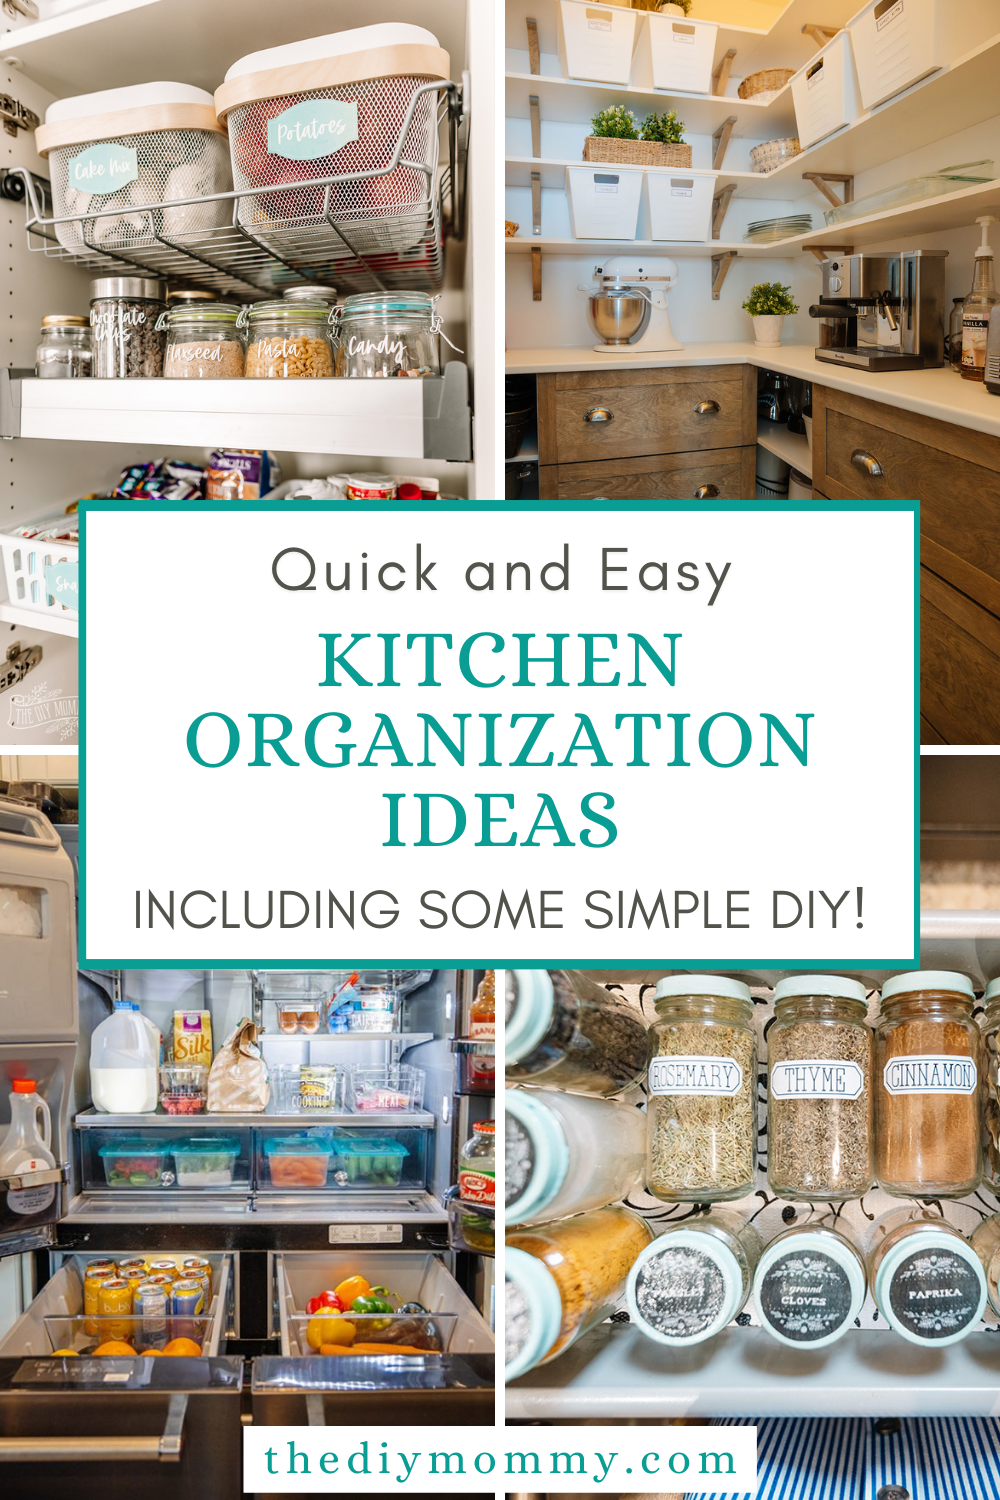 Quick And Easy Kitchen Organization Ideas, Including Some Simple DIY!